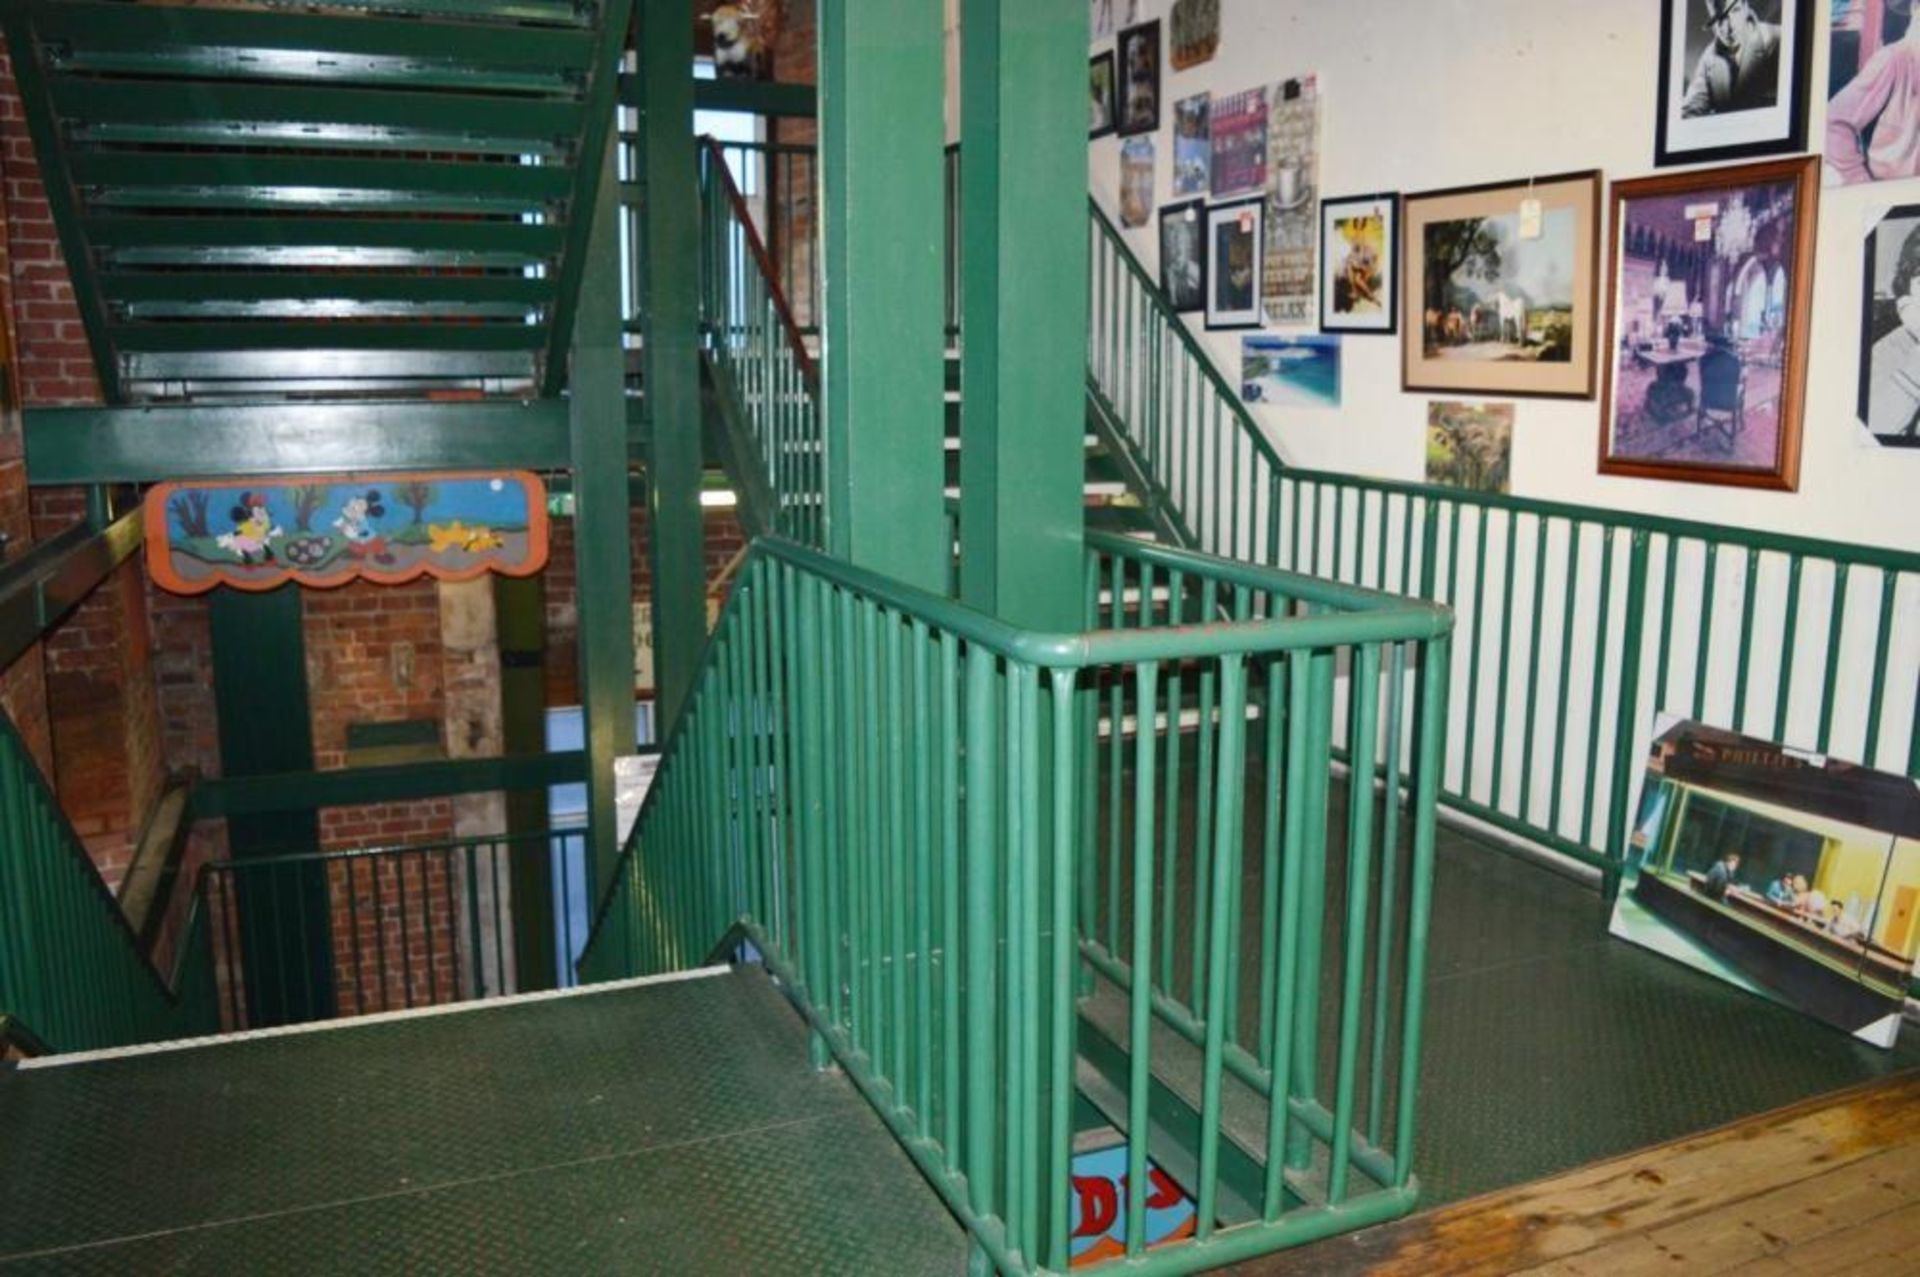 Botany Bay Heavy Duty Steel Customer Stairway - Covers Five Floors with an Overall Height of Approx - Image 11 of 30